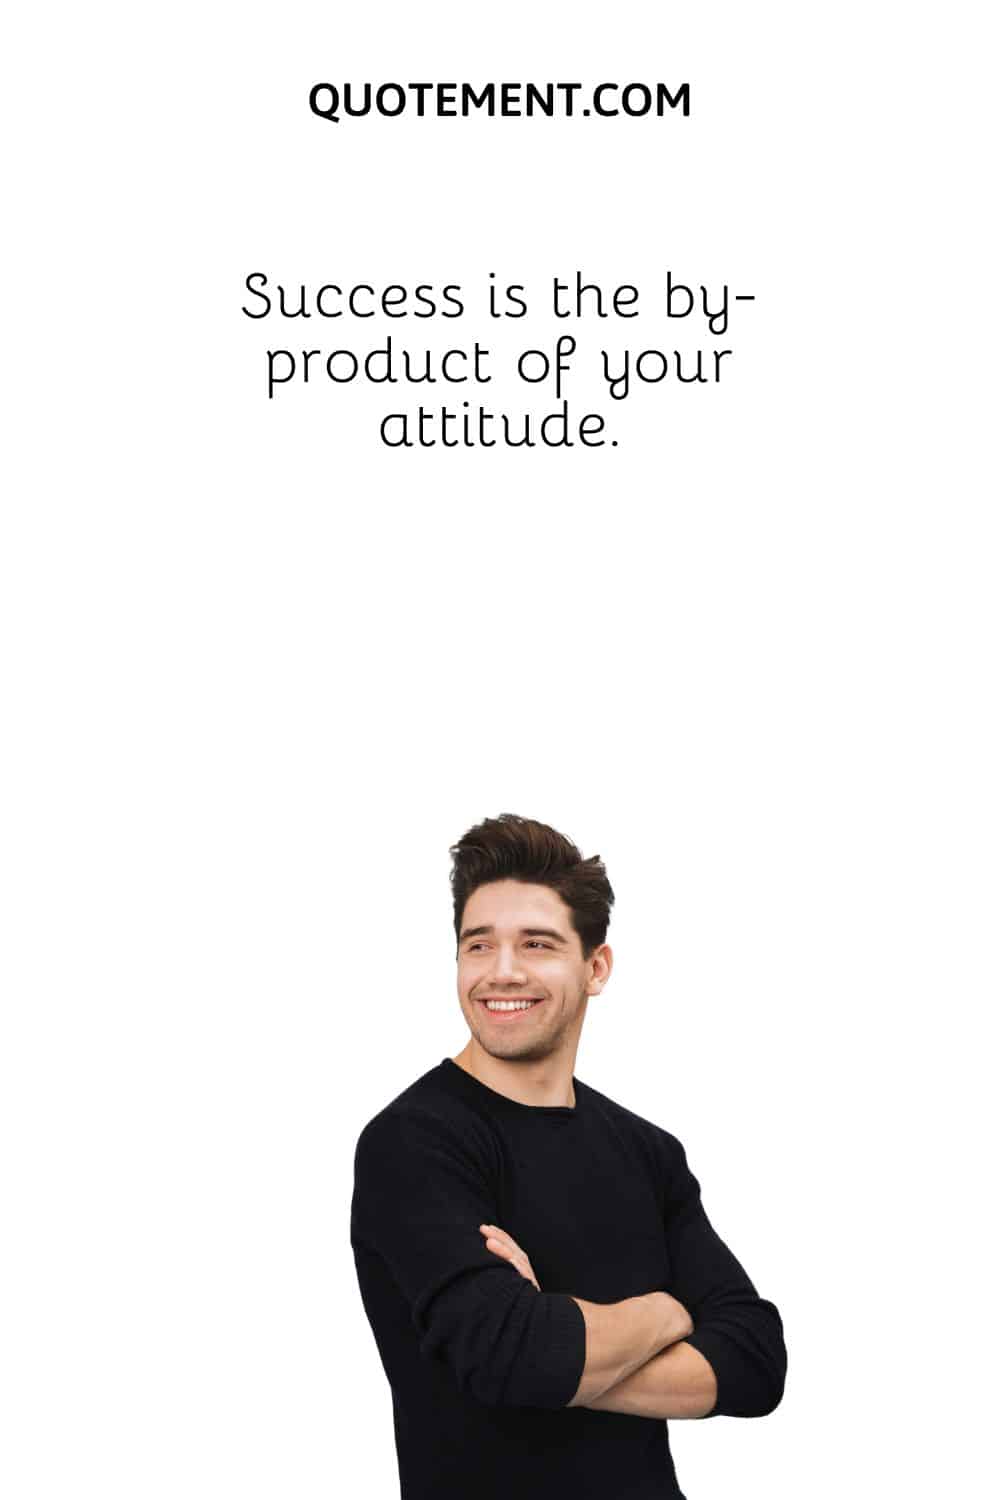 Success is the by-product of your attitude